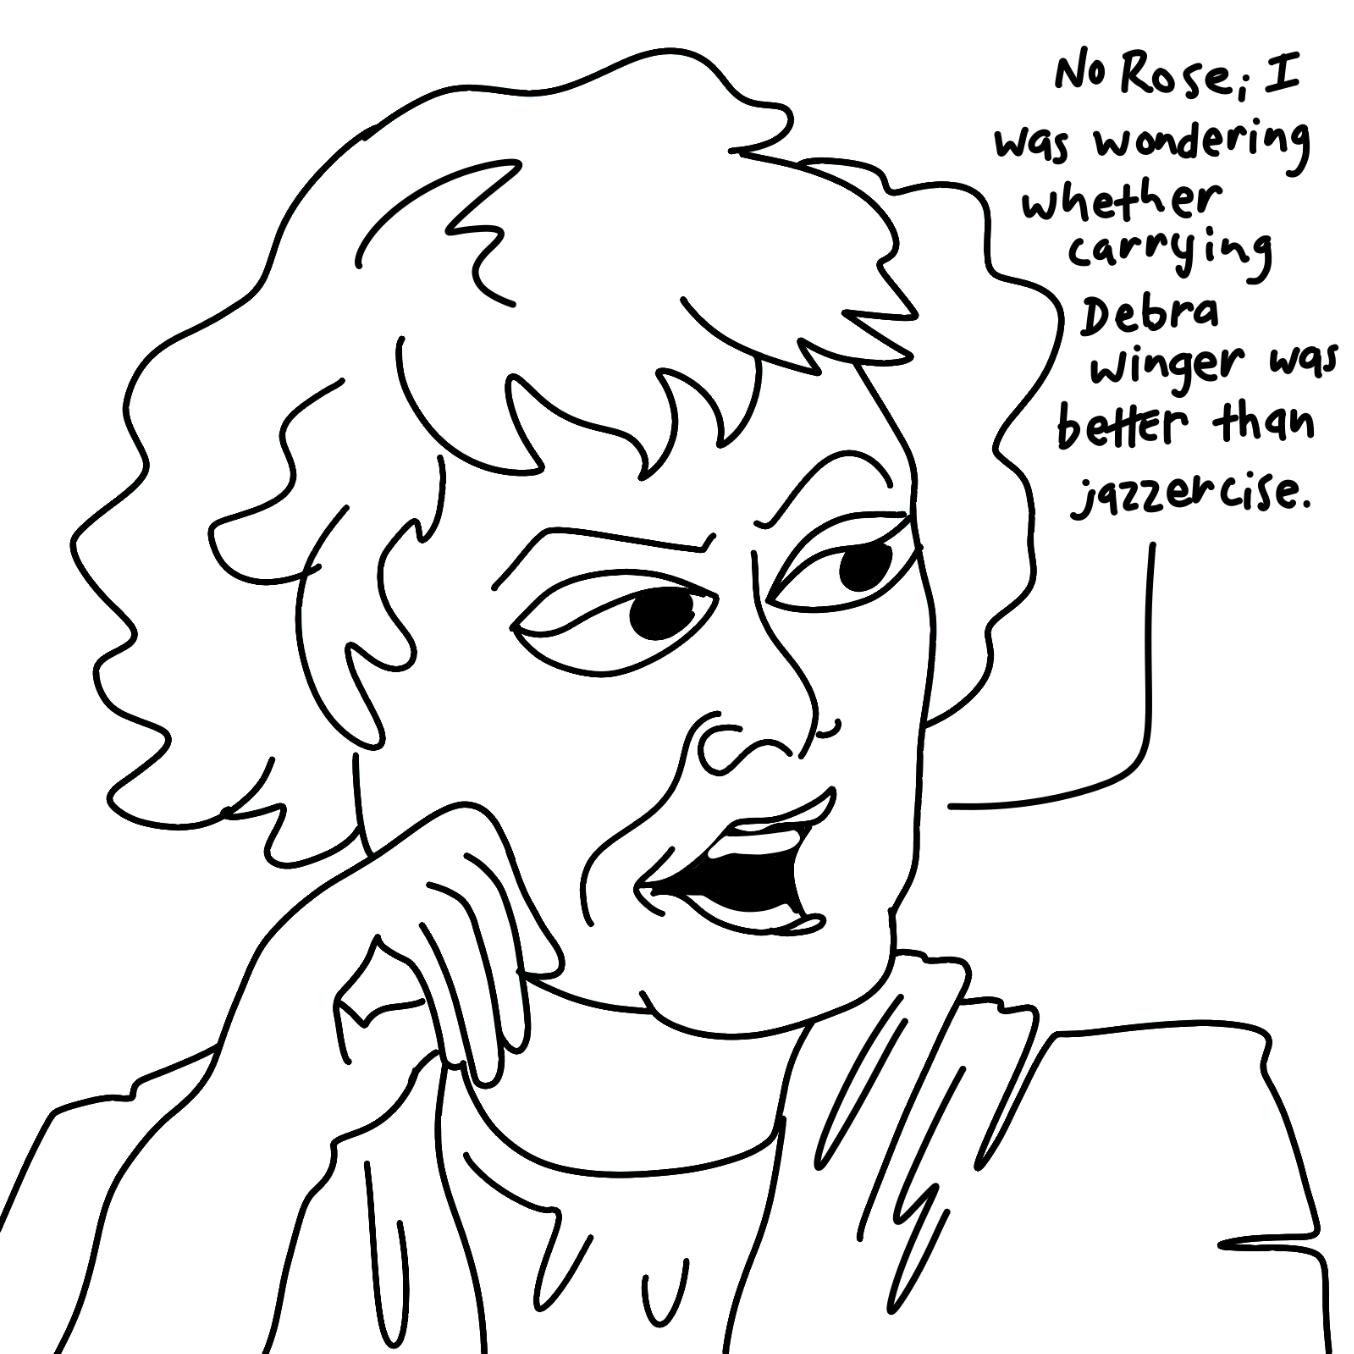 First panel in Dorothy Zbornak: Queen of the Sarcastic Zinger drawn in our free online drawing game